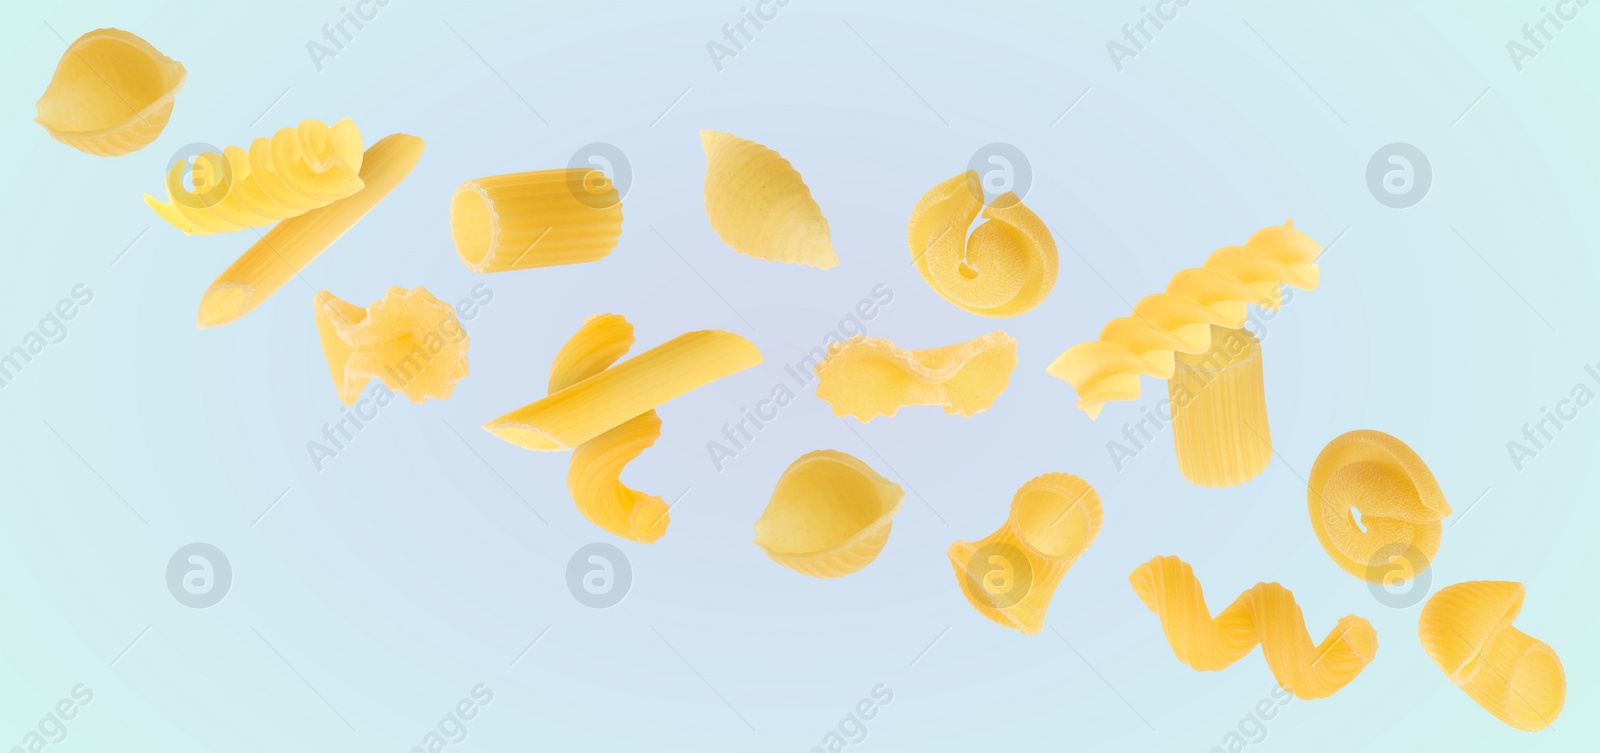 Image of Different types of pasta flying on dusty light blue background